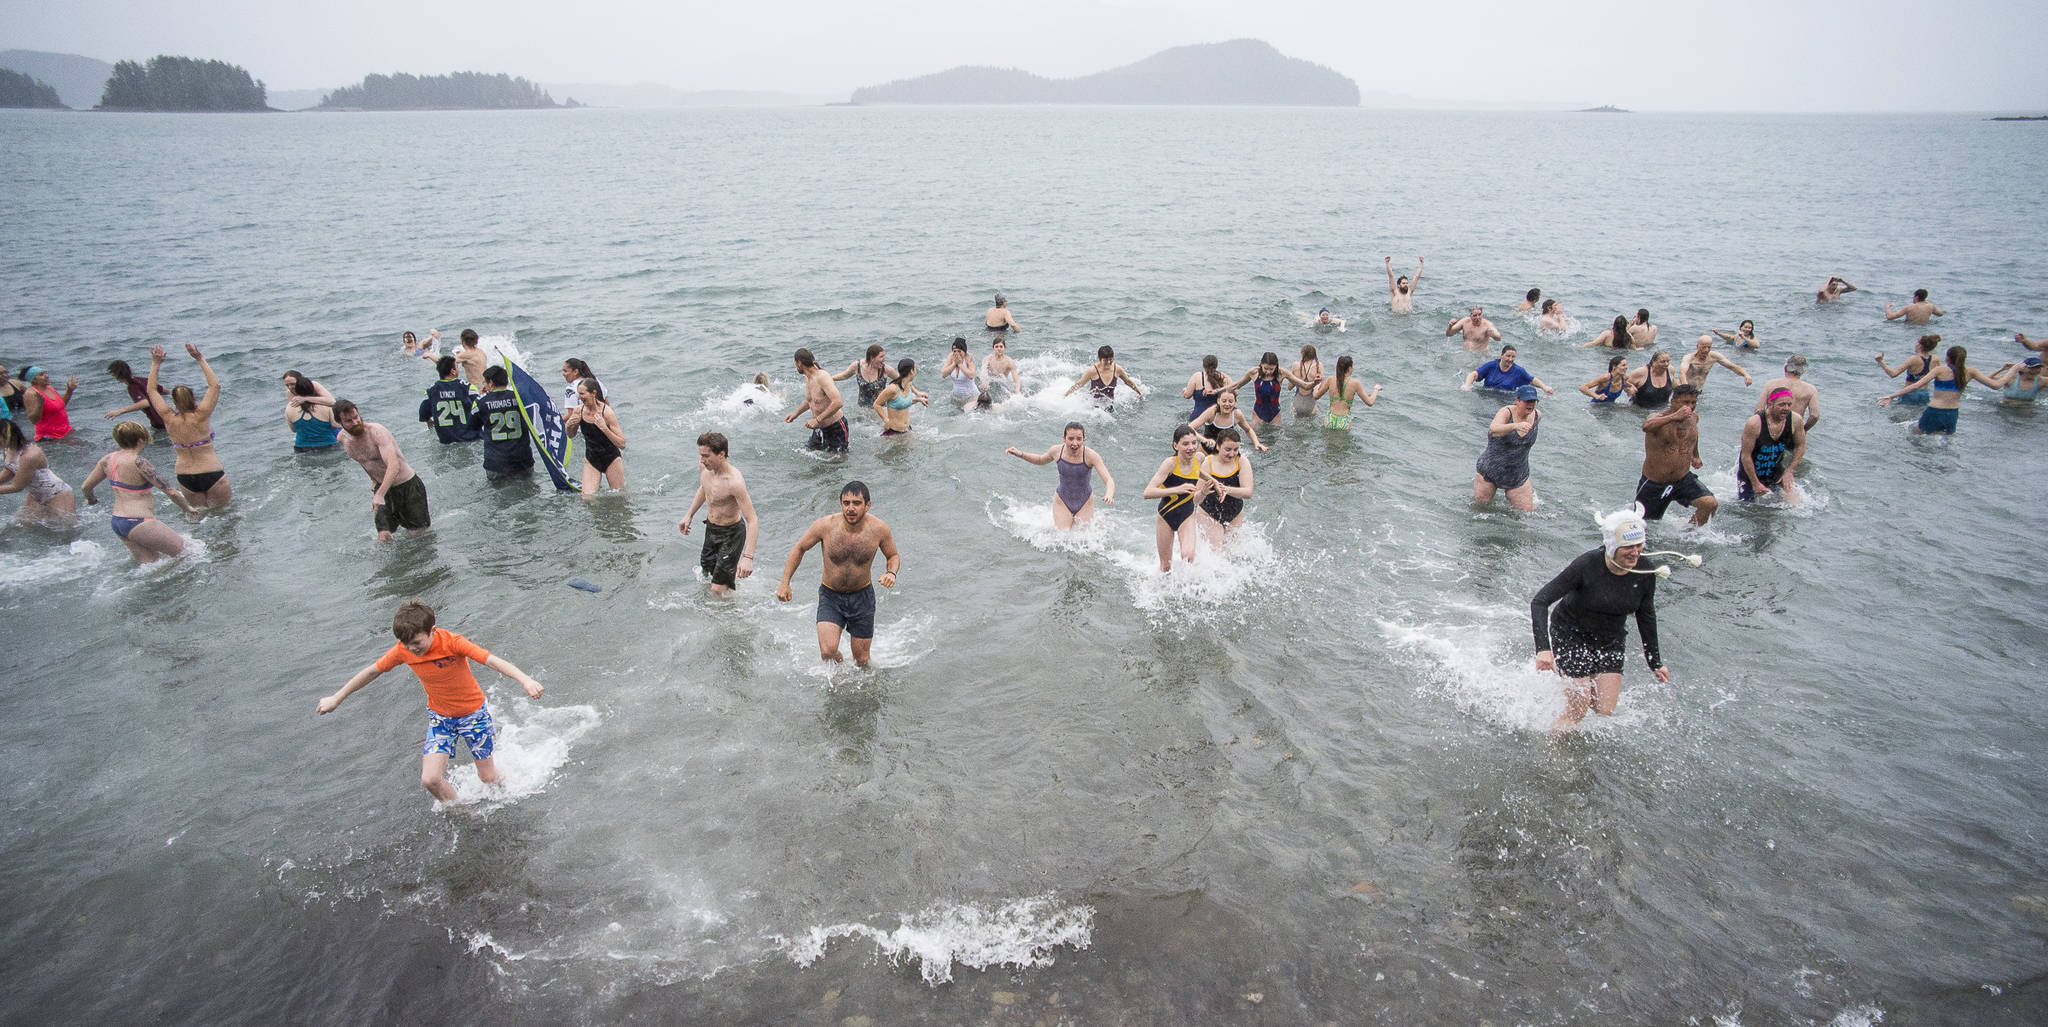 Juneau residents take to the frigid waters at Auke Bay Recreation Area for the annual Juneau Polar Bear Dip on Tuesday, Jan. 1, 2019. Nearly 200 people took the plunge to start off the new year. (Michael Penn | Juneau Empire)